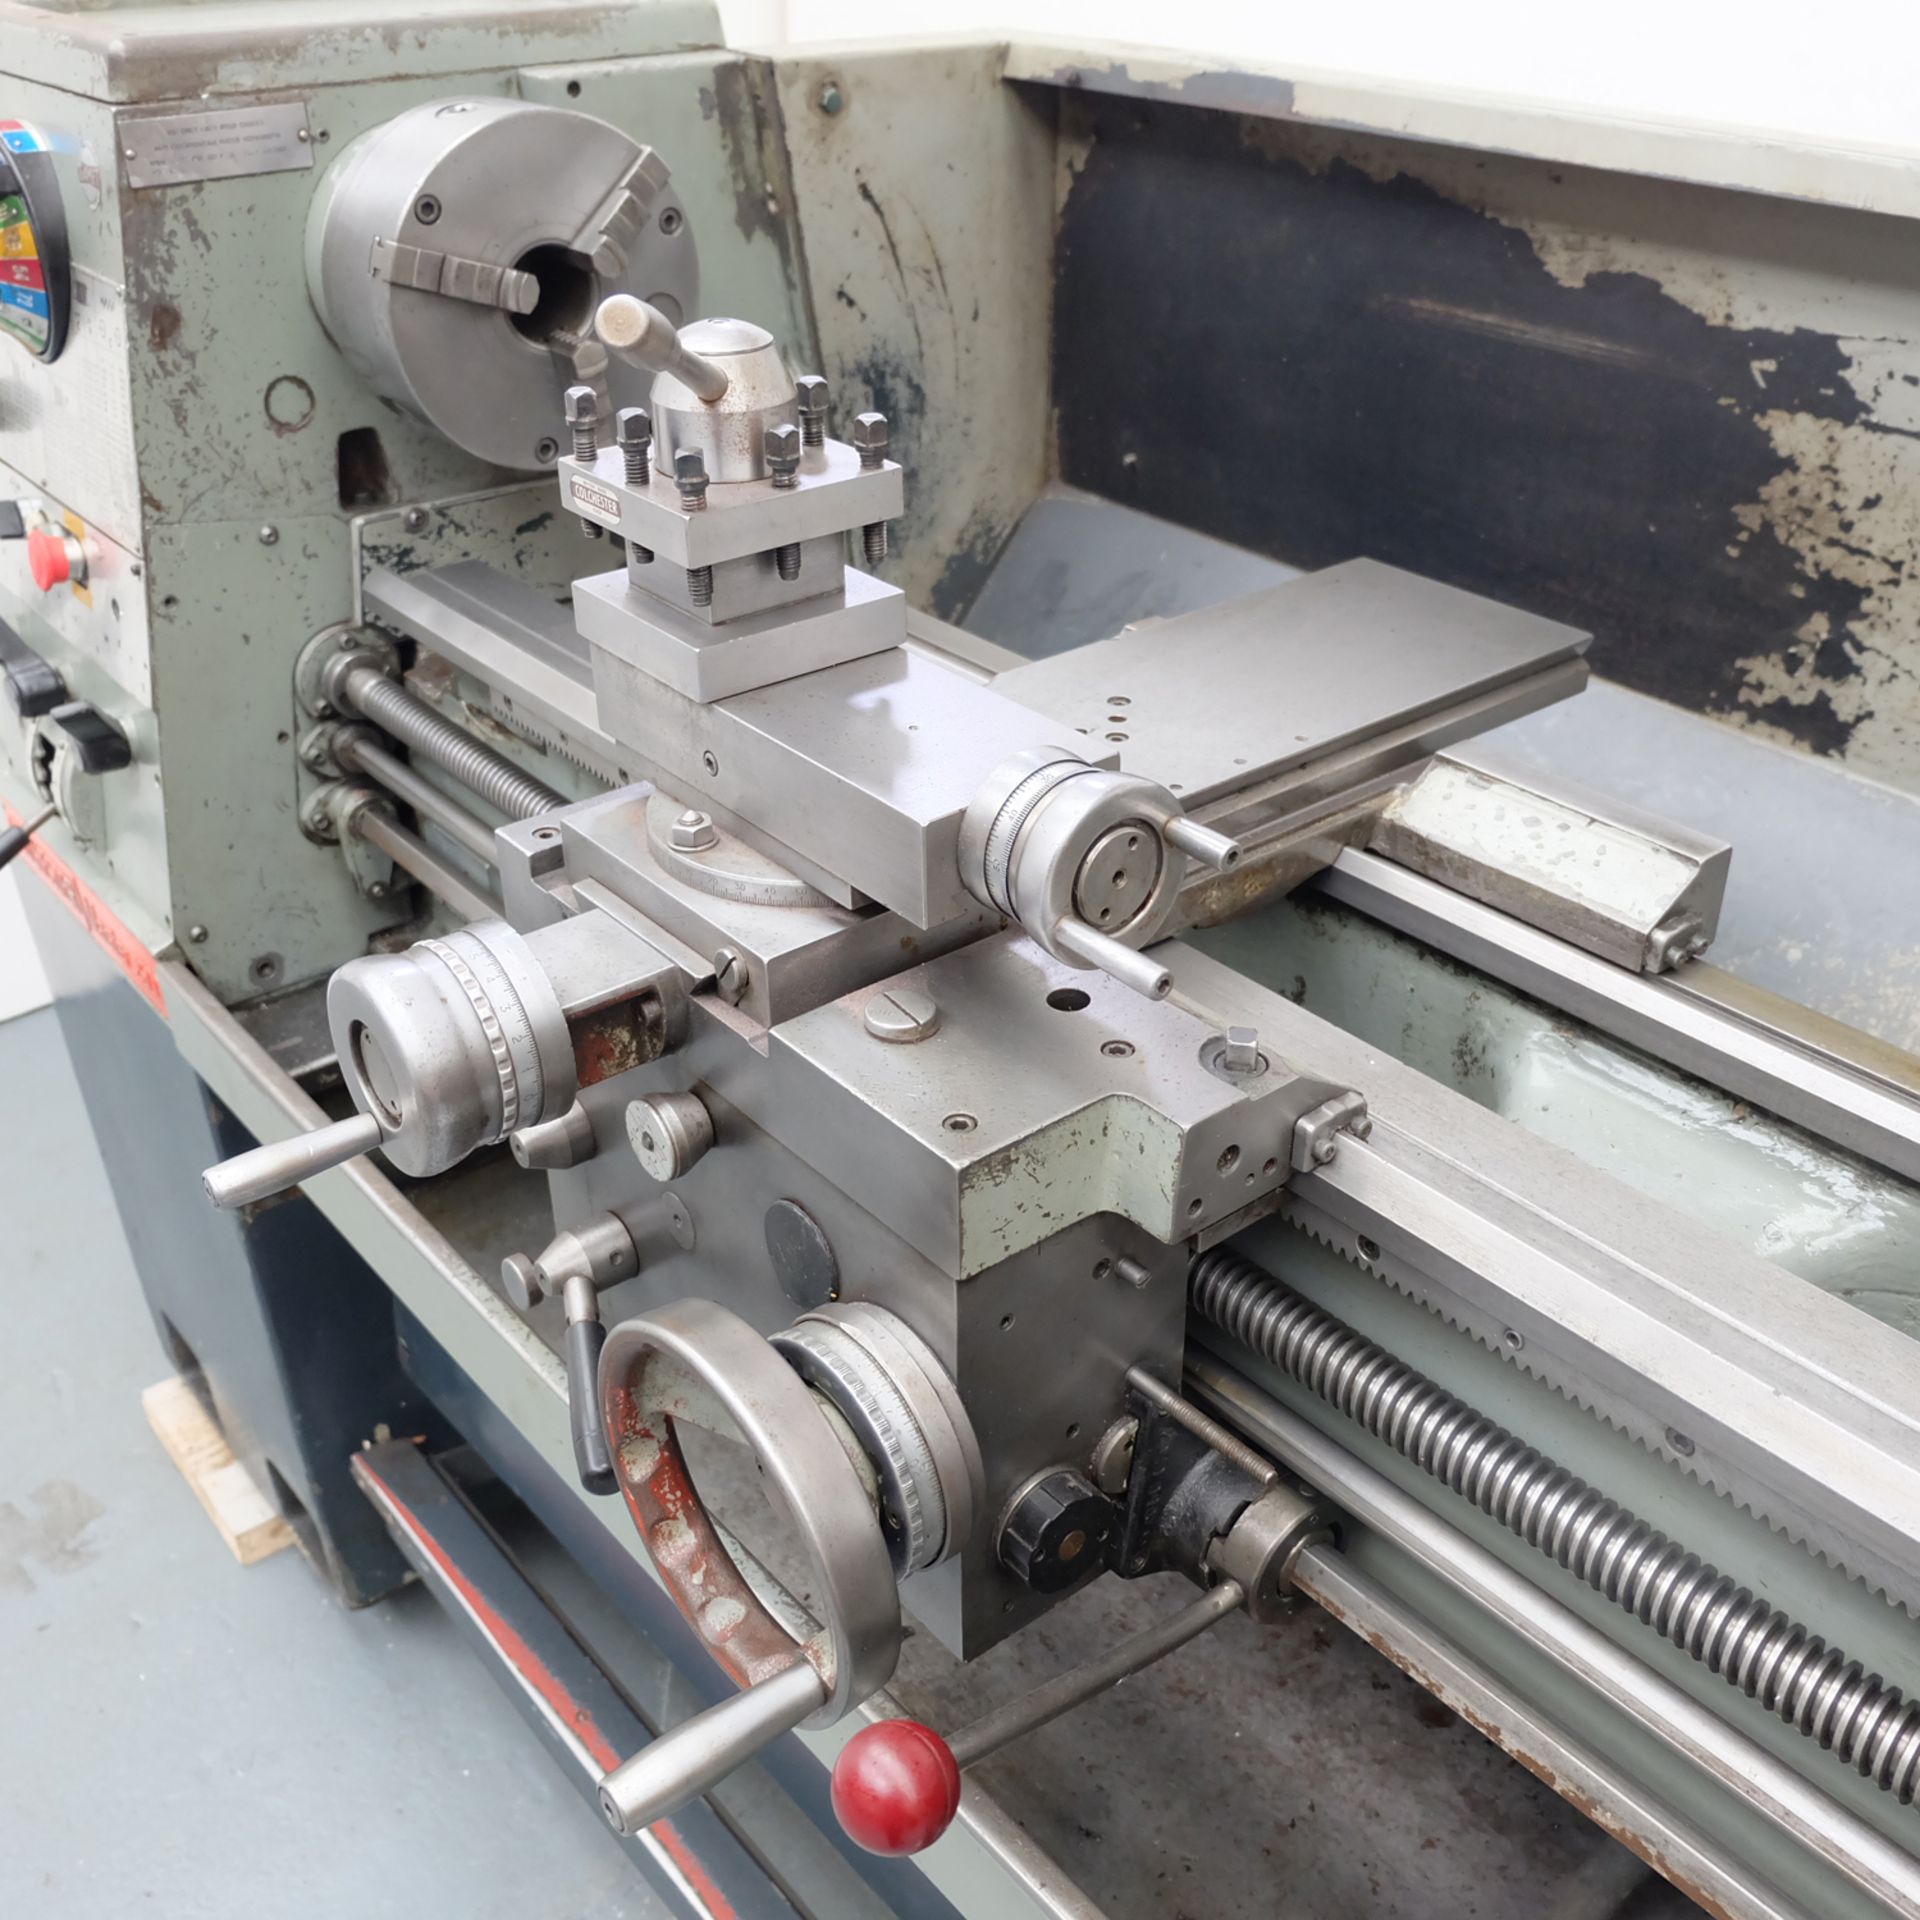 Colchester Master 2500 Gap Bed Centre Lathe. Height of Centres 6 1/2". Swing Over Bed 13 1/4". - Image 6 of 10